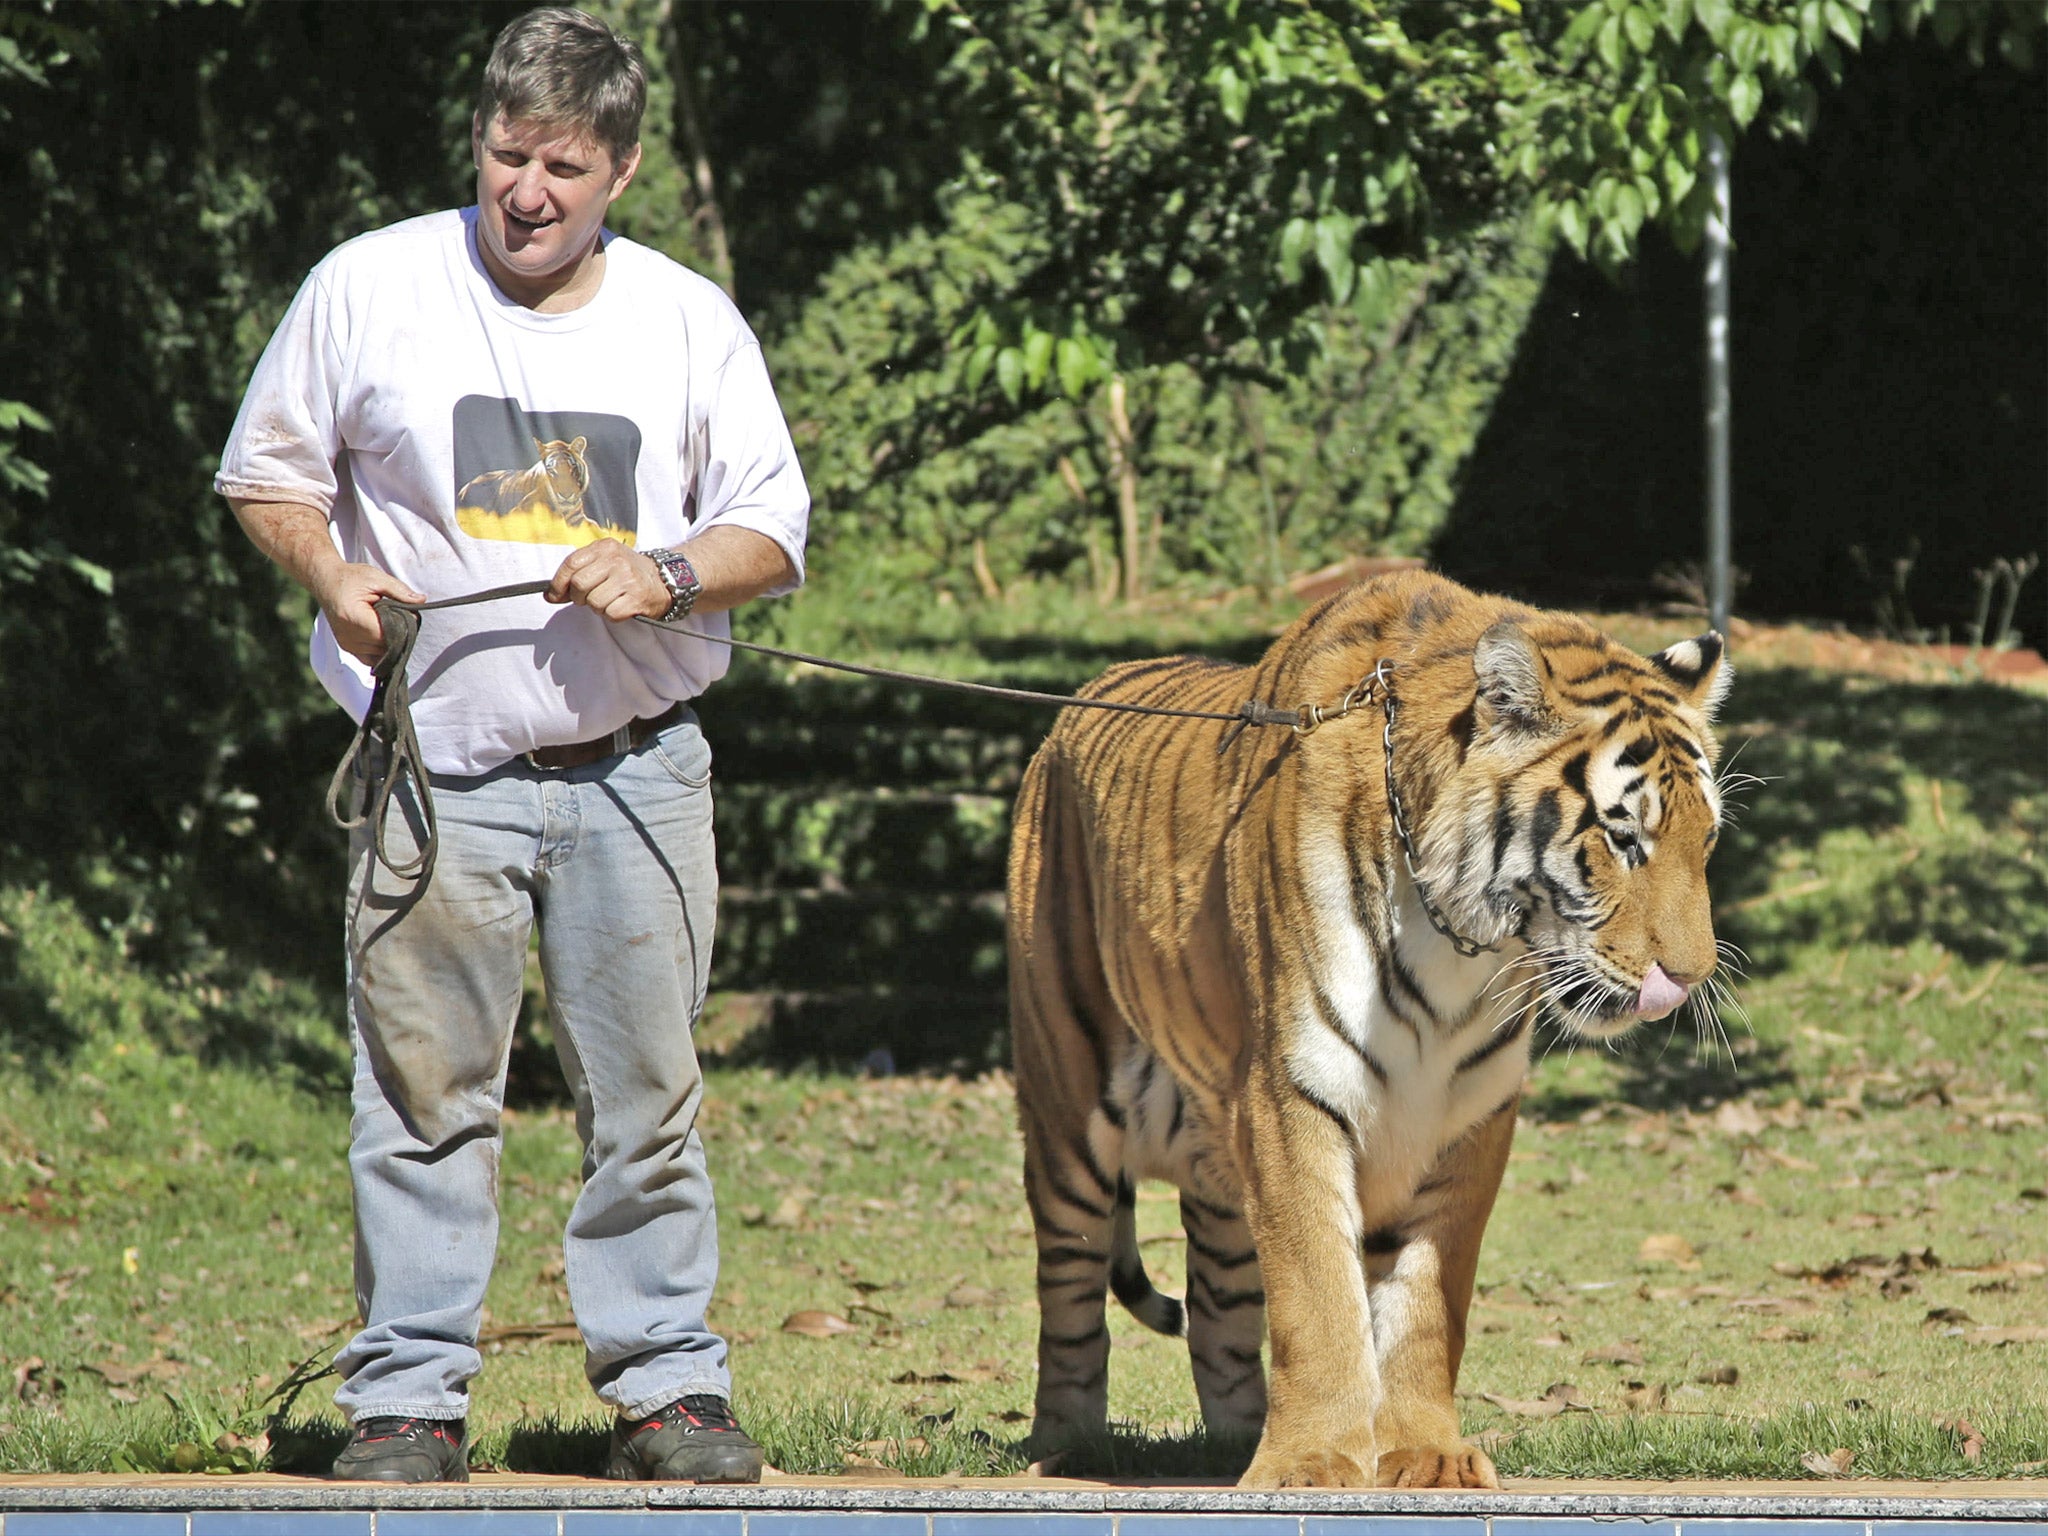 Ary Borges with Tom the tiger in his garden